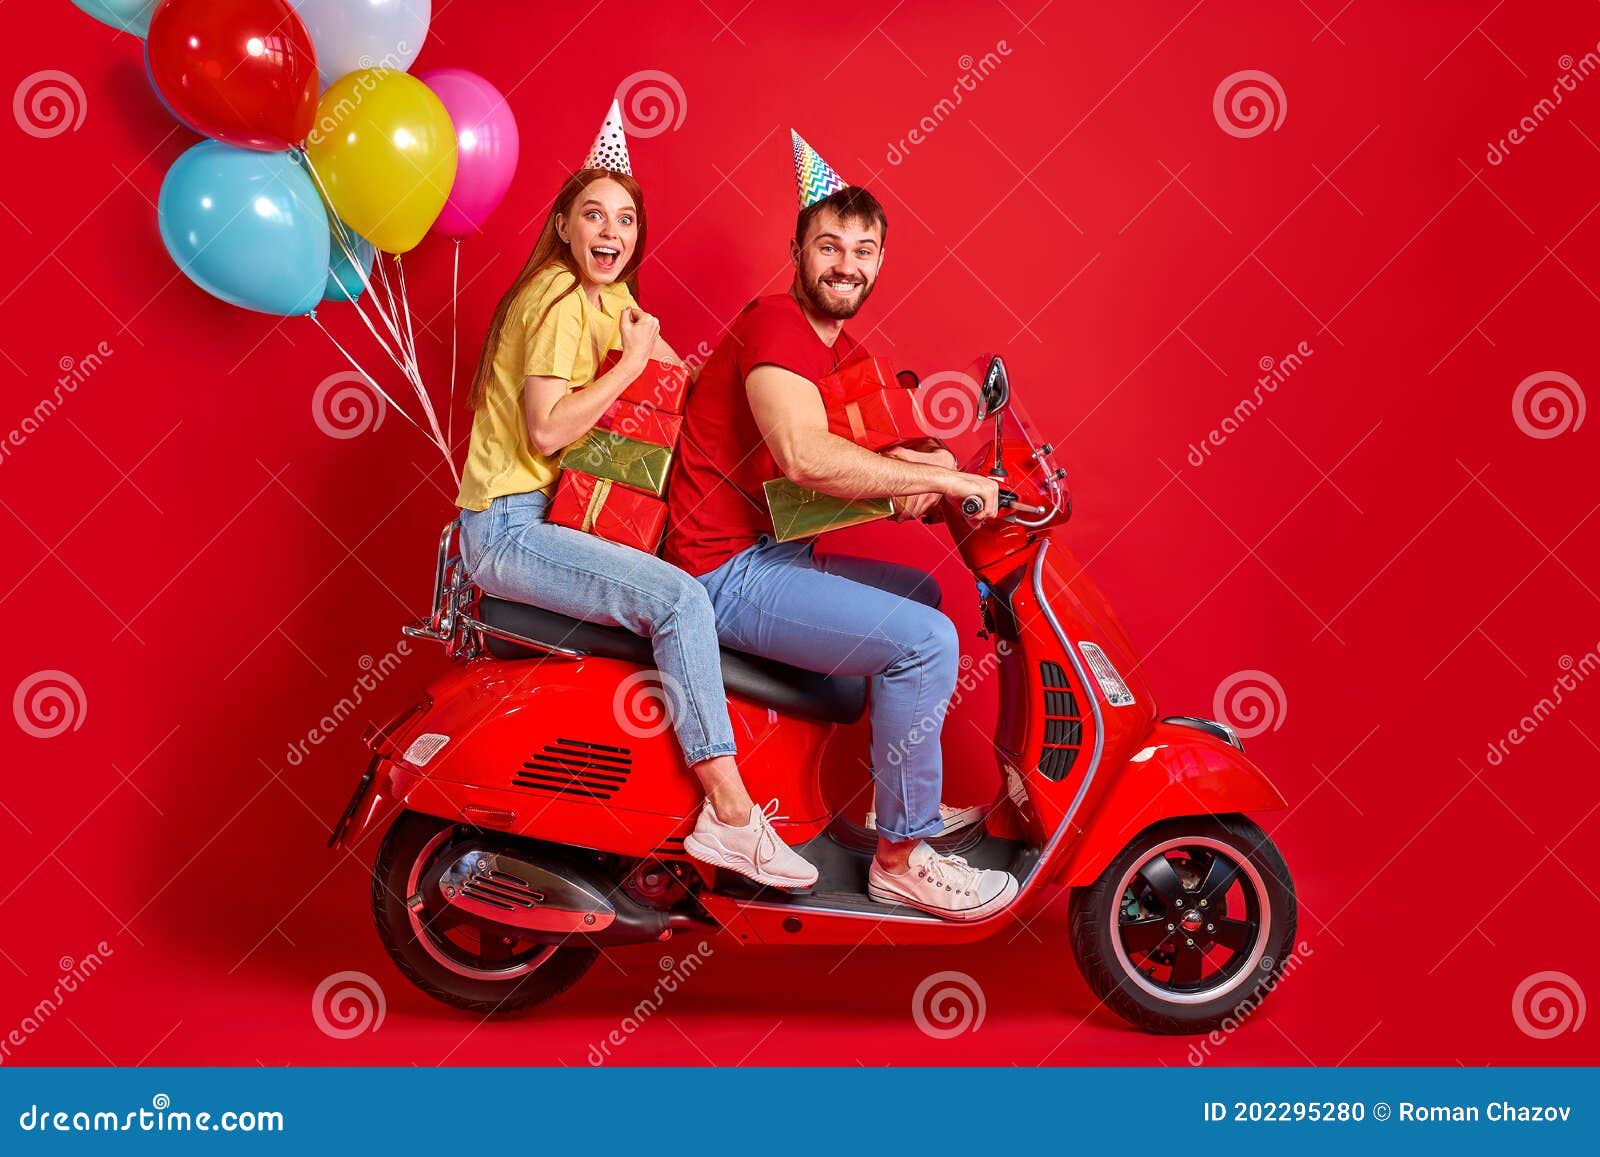 Funny Two People Friends Drive Motorbike Deliver Gifts Presents for  Birthday Stock Photo - Image of celebration, love: 202295280